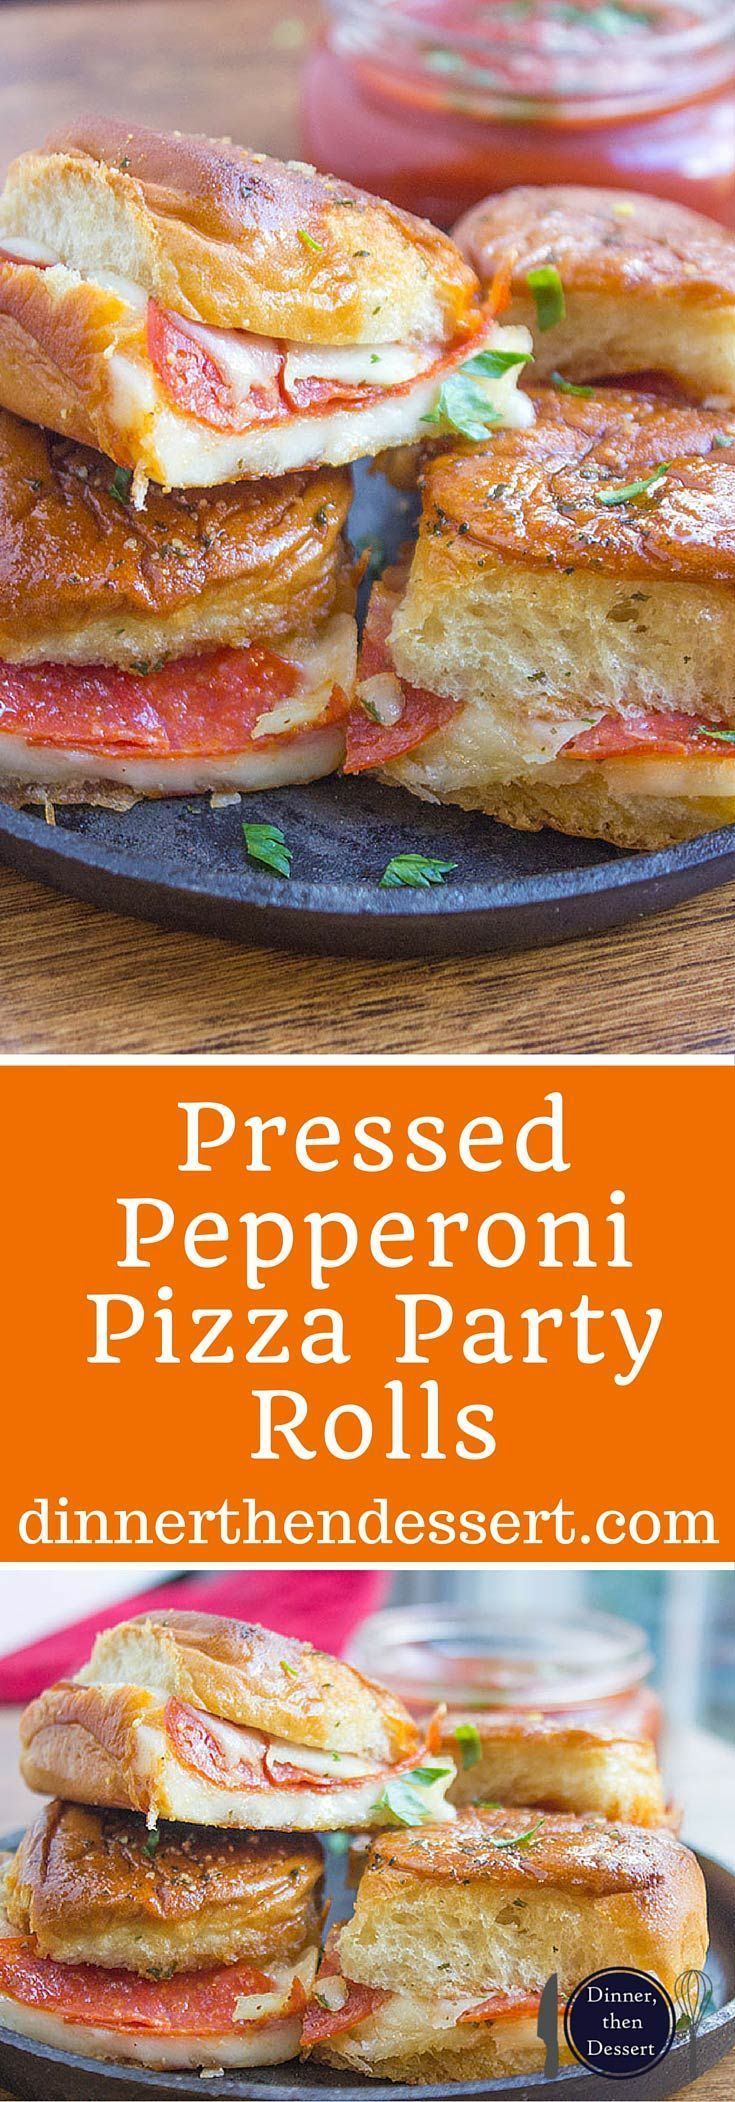 Pressed Pepperoni Pizza Party Rolls are crispy, cheesy, dippable and perfect make ahead for serving a crowd! -   25 italian recipes for a crowd
 ideas